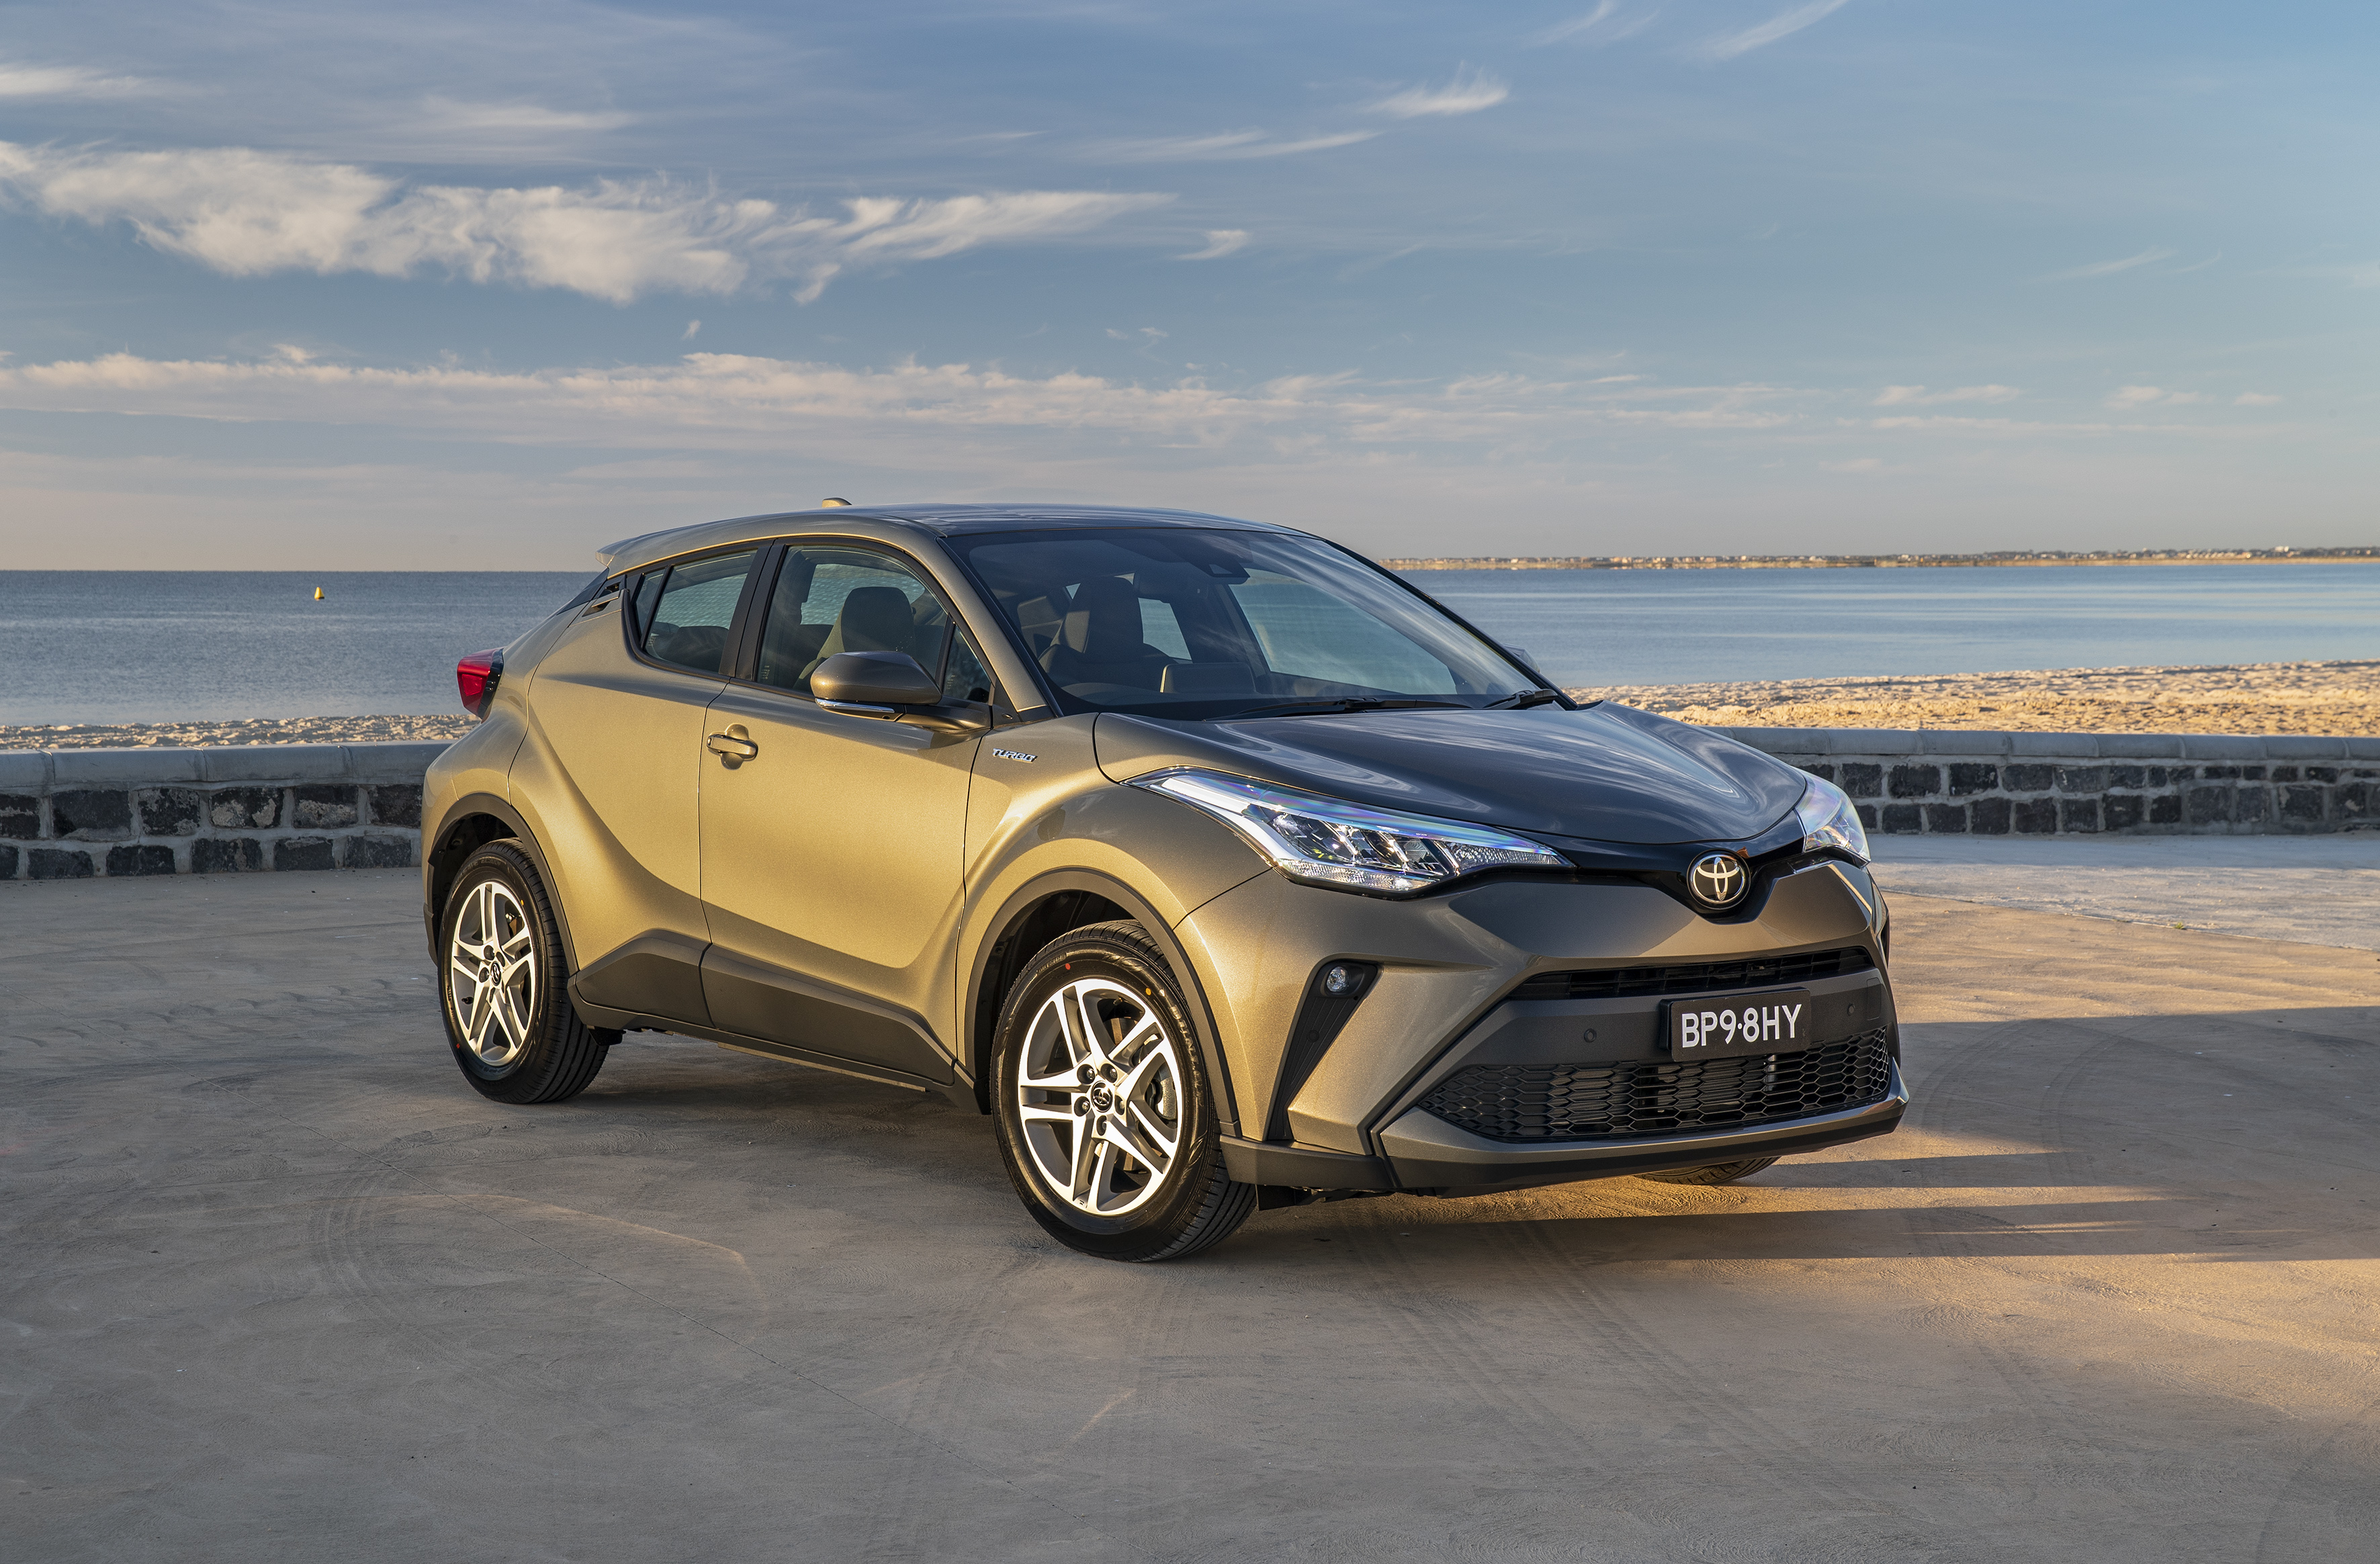 Toyota’s radical C-HR compact SUV gets an update including hybrid